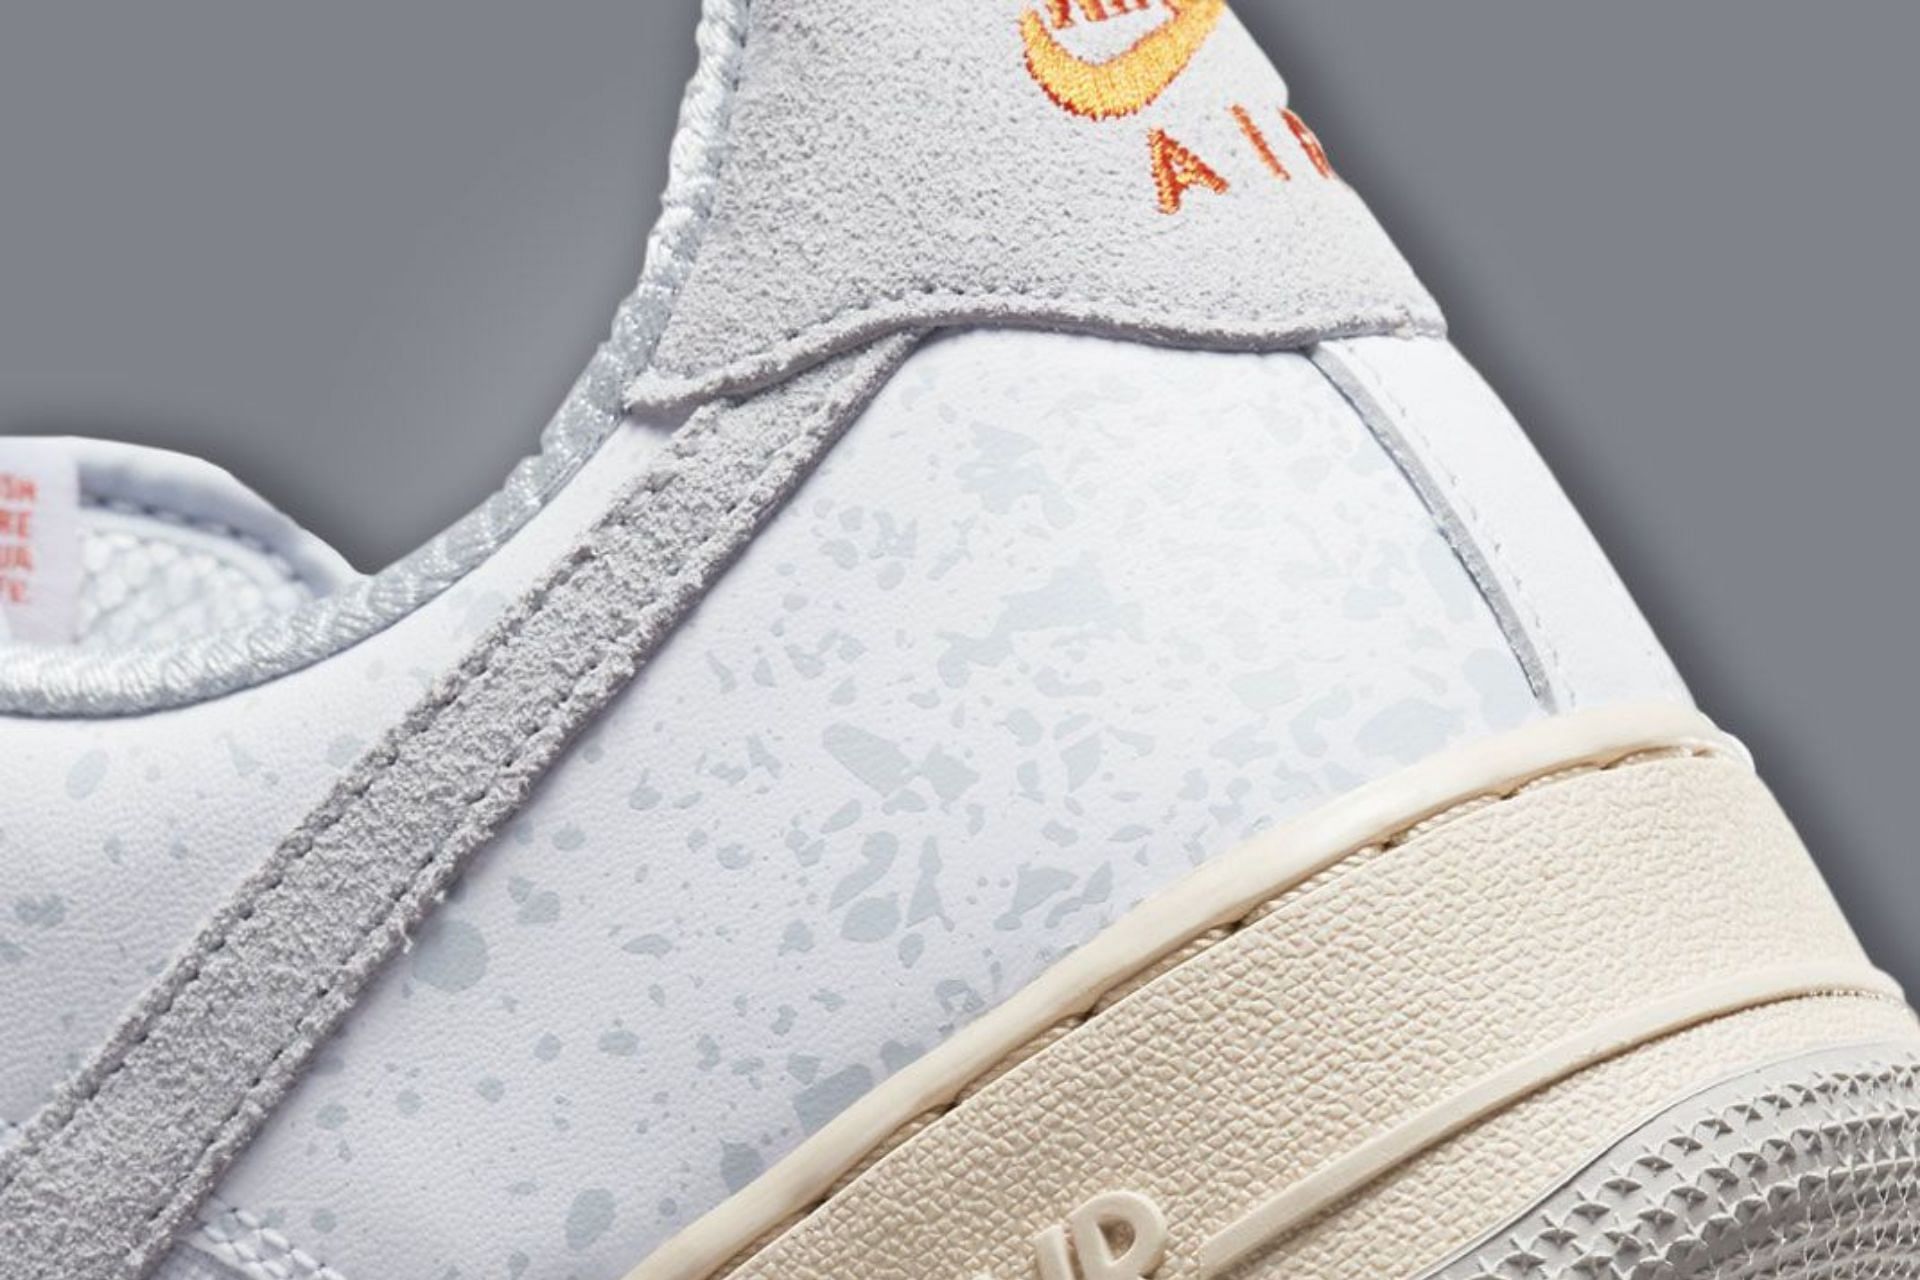 Take a closer look at the heel counters of the shoes (image via Nike)